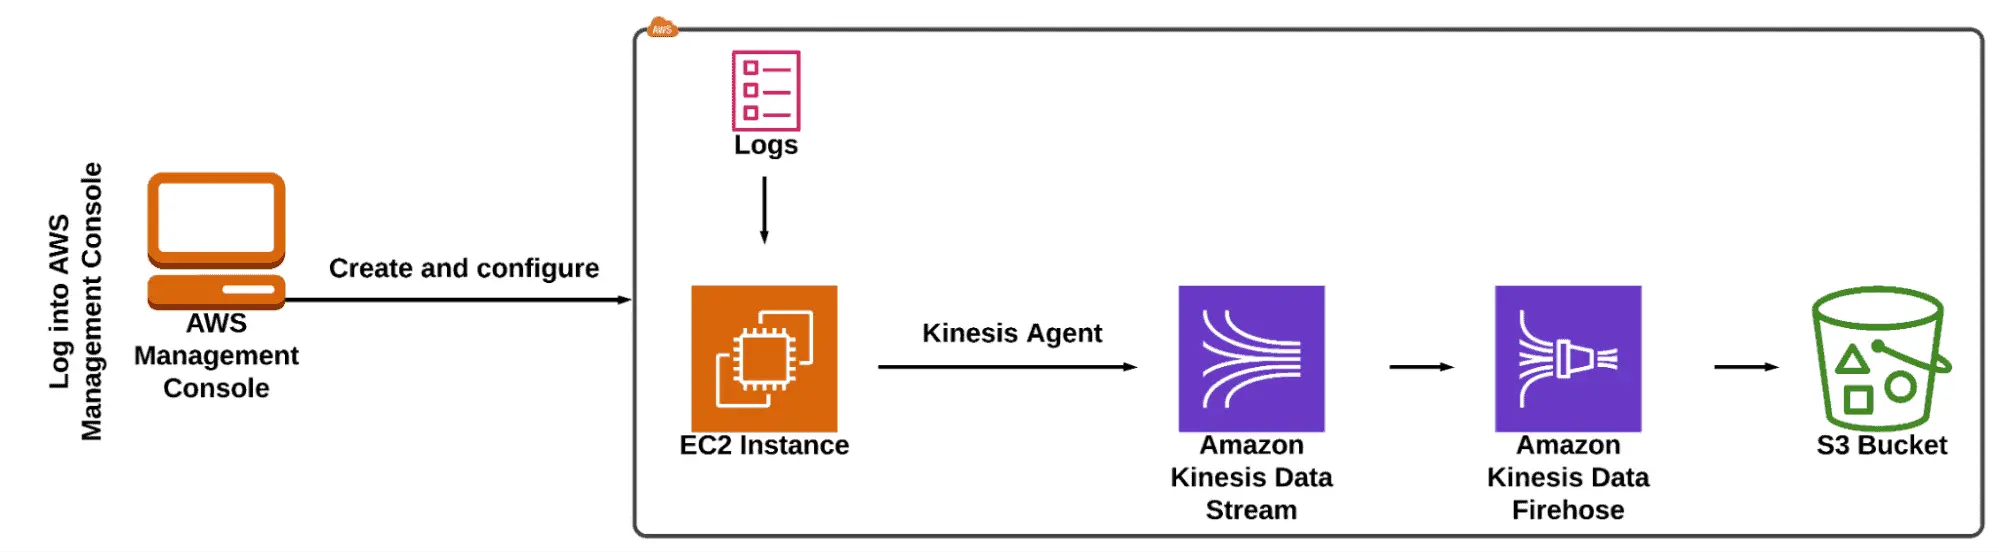 live streaming data system using Kinesis Agent and Amazon Kinesis Data Stream